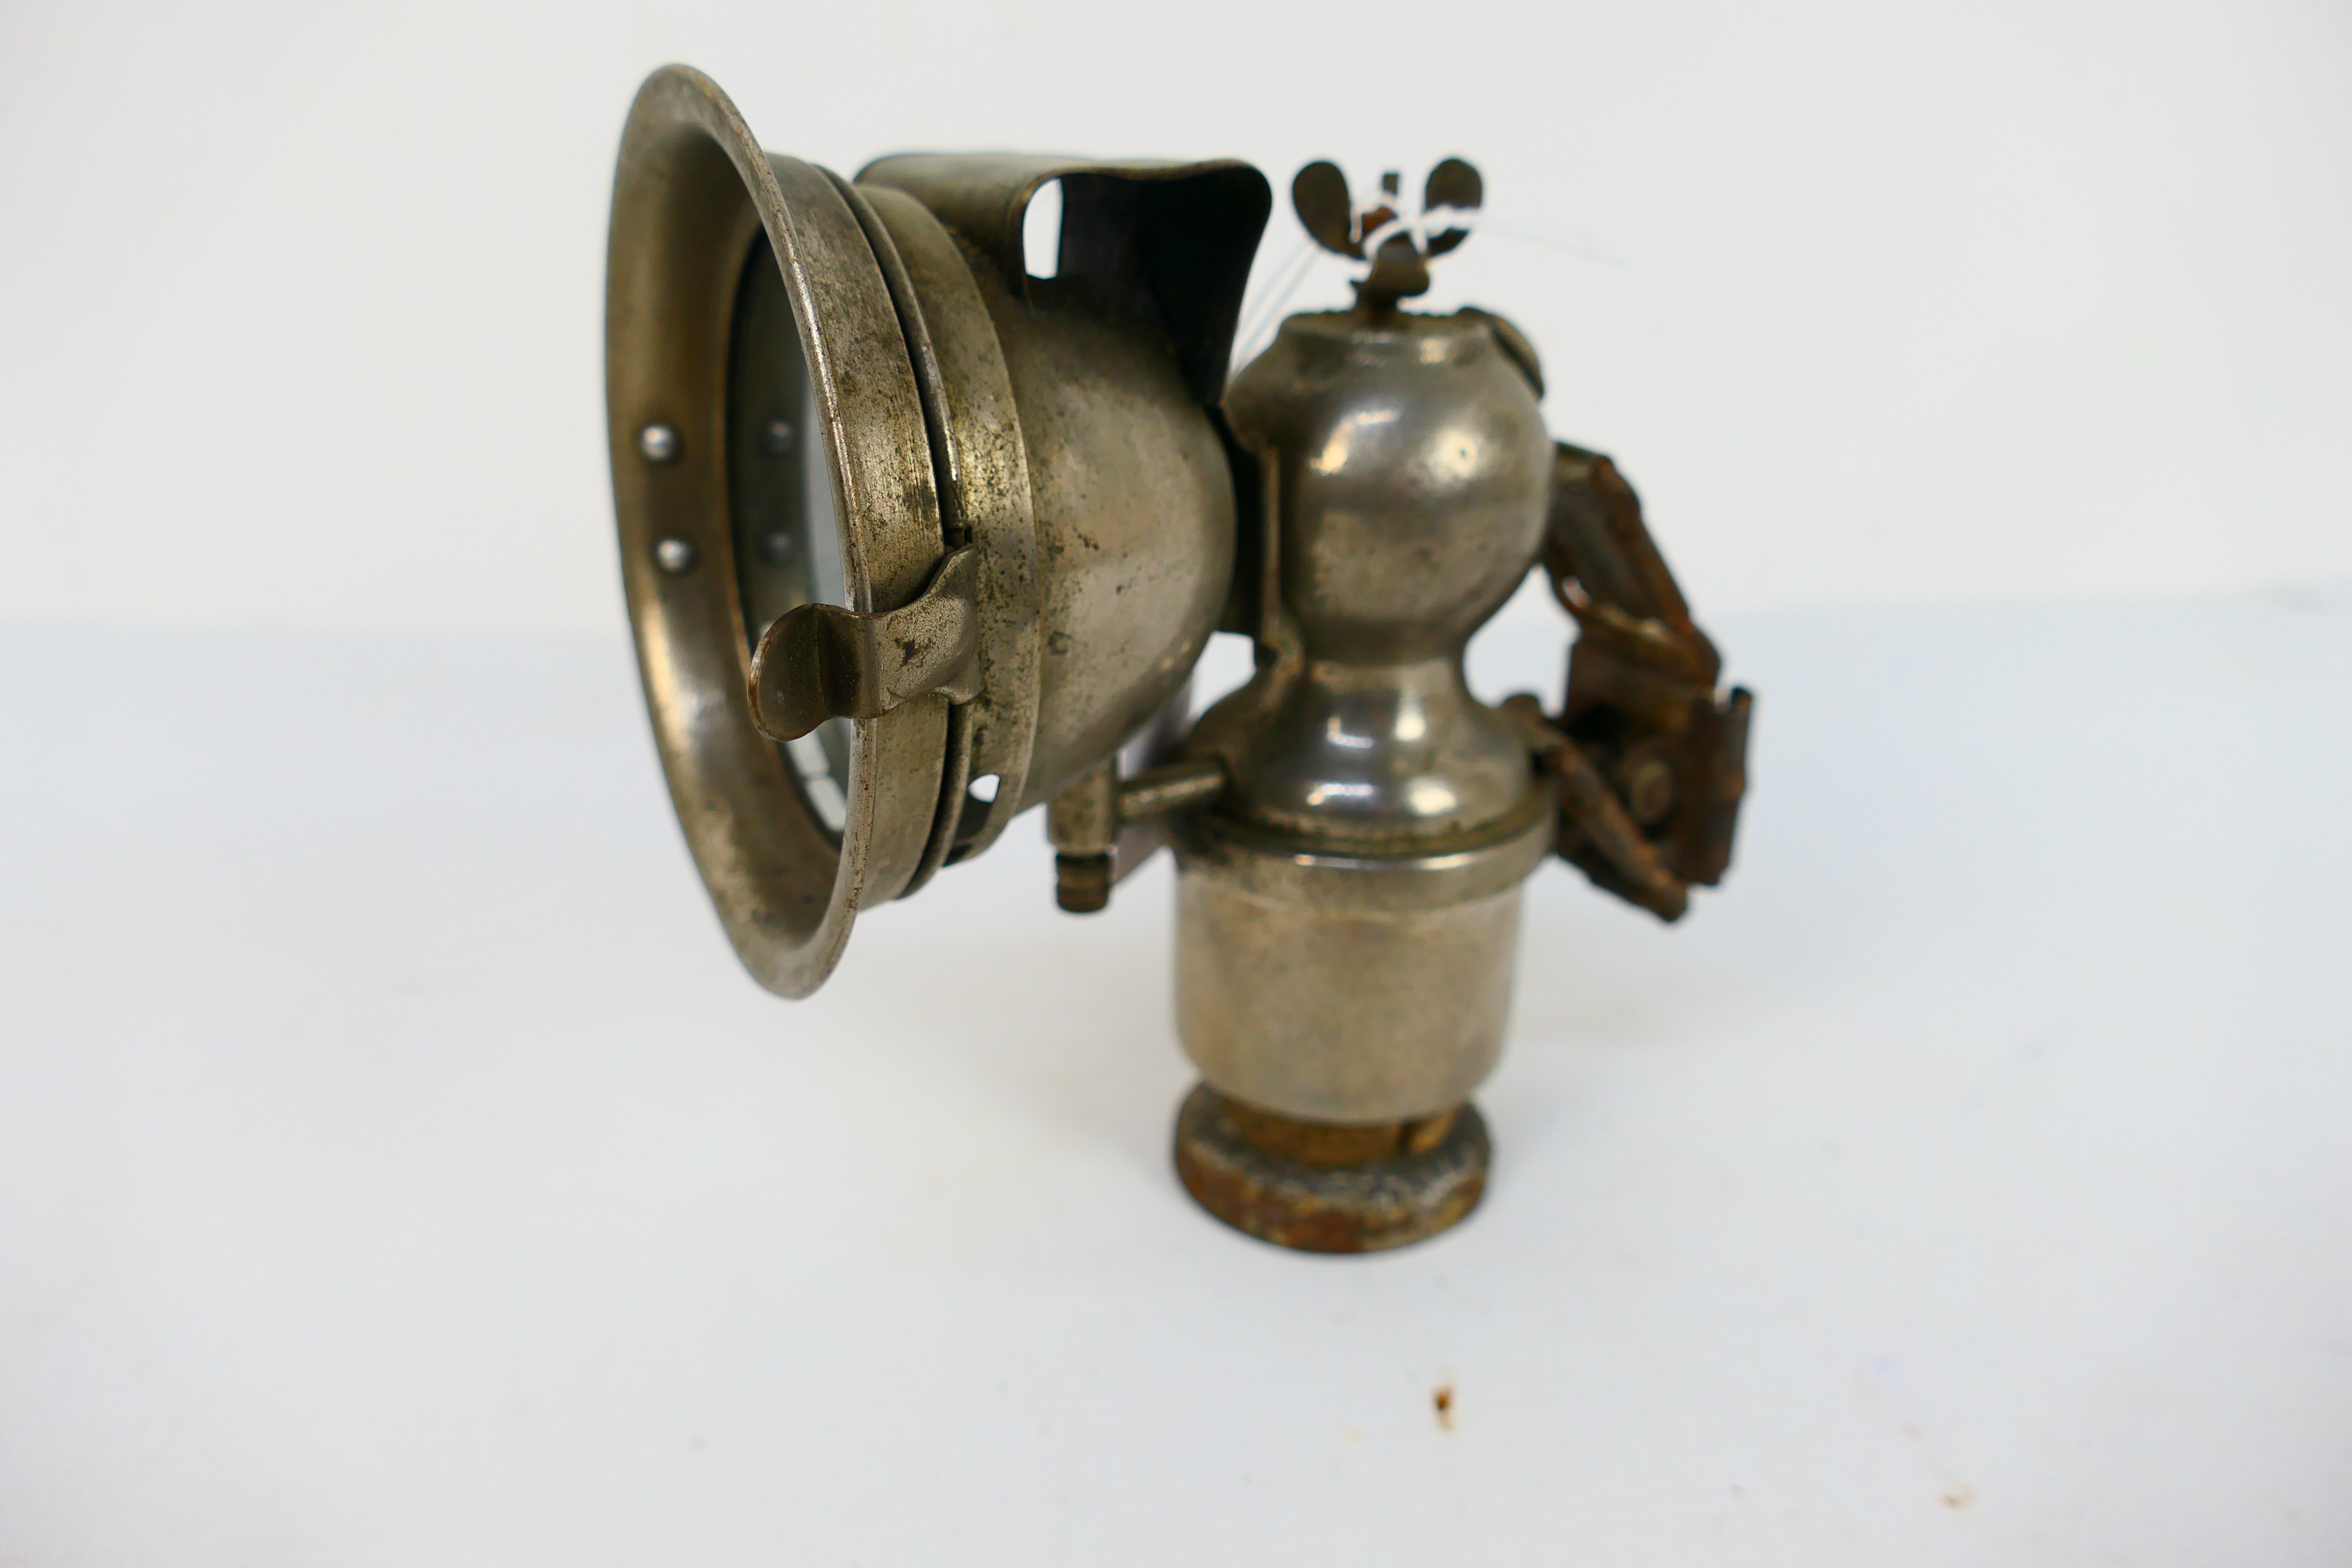 A vintage acetylene or carbide bicycle lamp with 2¾" clear glass lens, approximately 15 cm (h). - Image 2 of 4